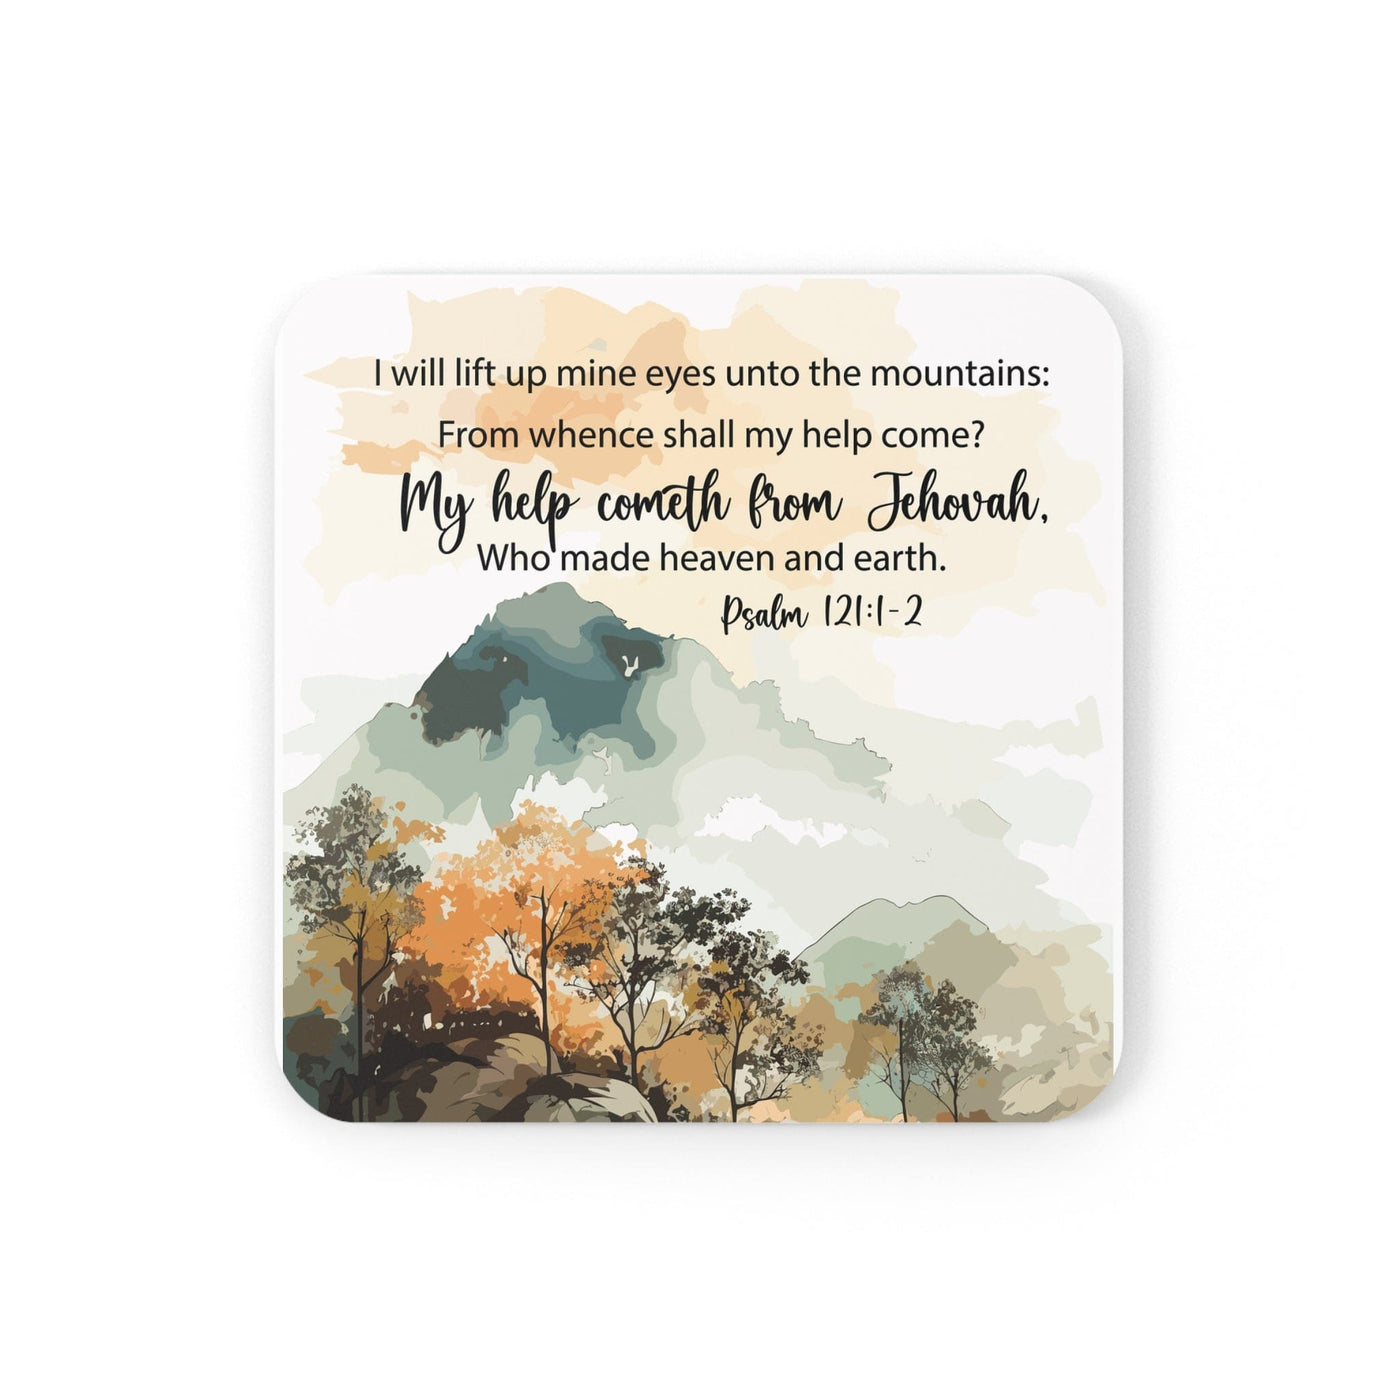 Handcrafted Square Coaster Set Of 4 For Drinks And Cups Psalm 121 My Help